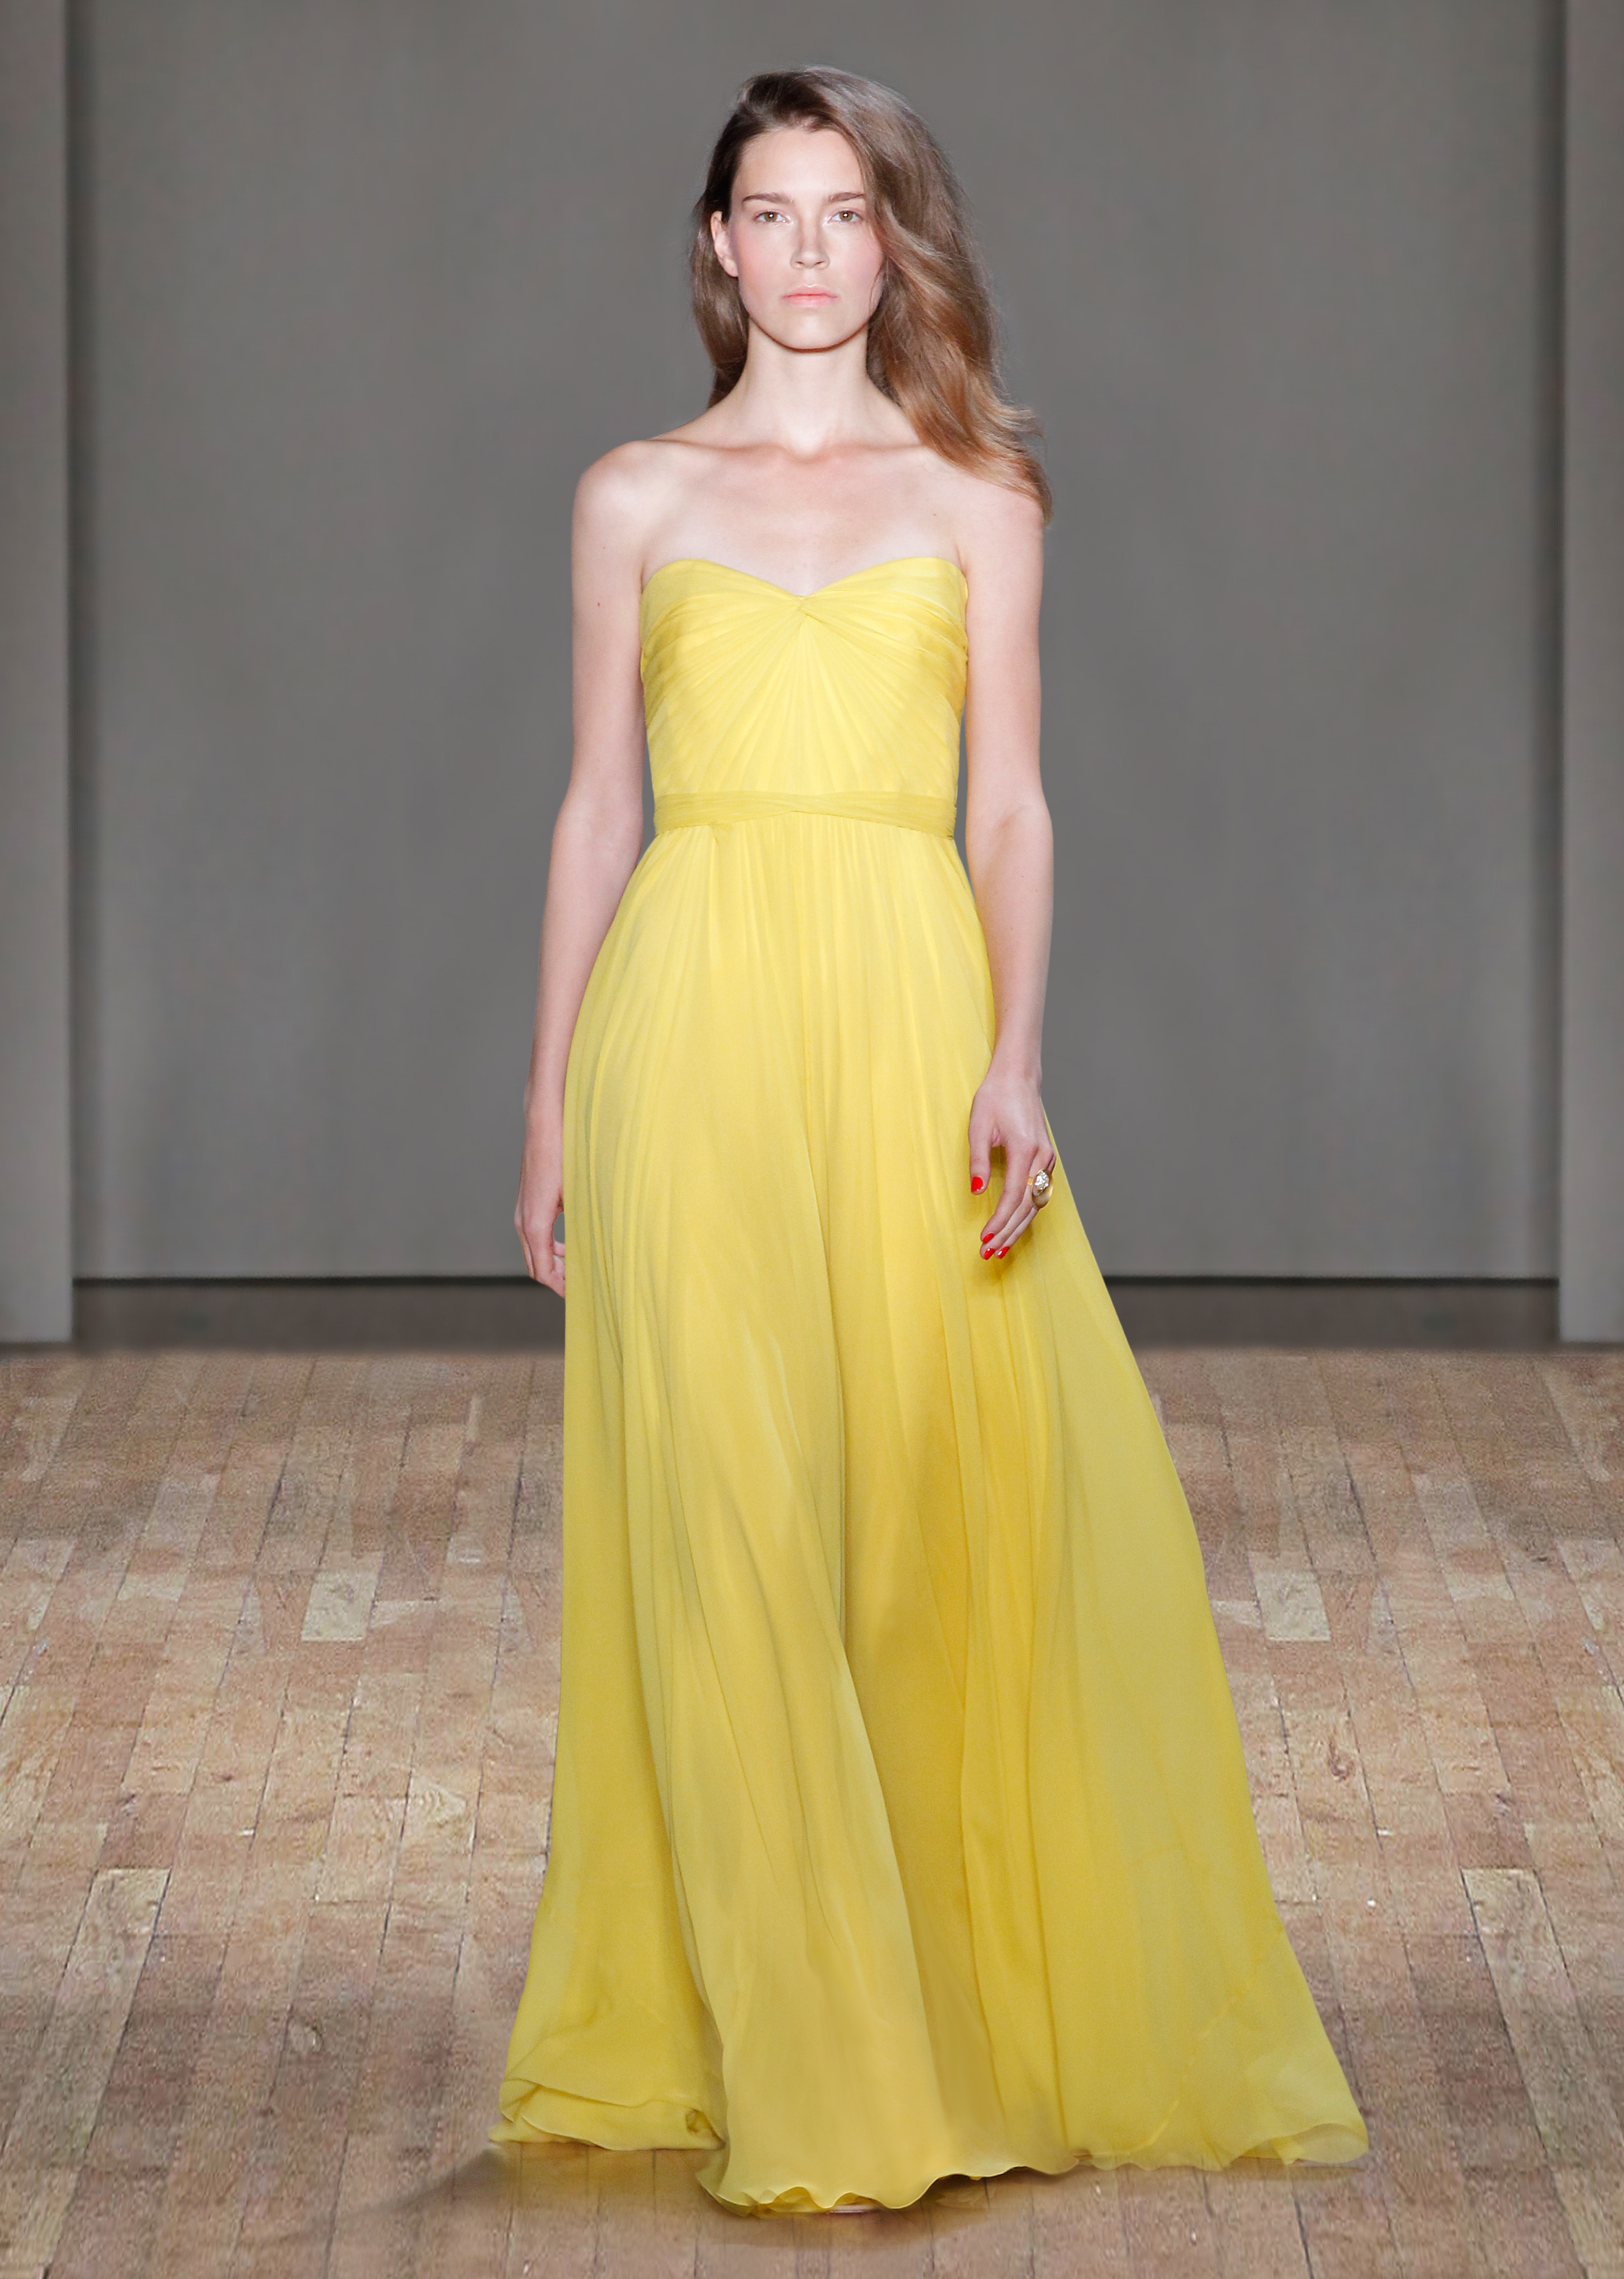 Five Key Spring/Summer 2015 Fashion Trends That Will Be Big in Bridal ...